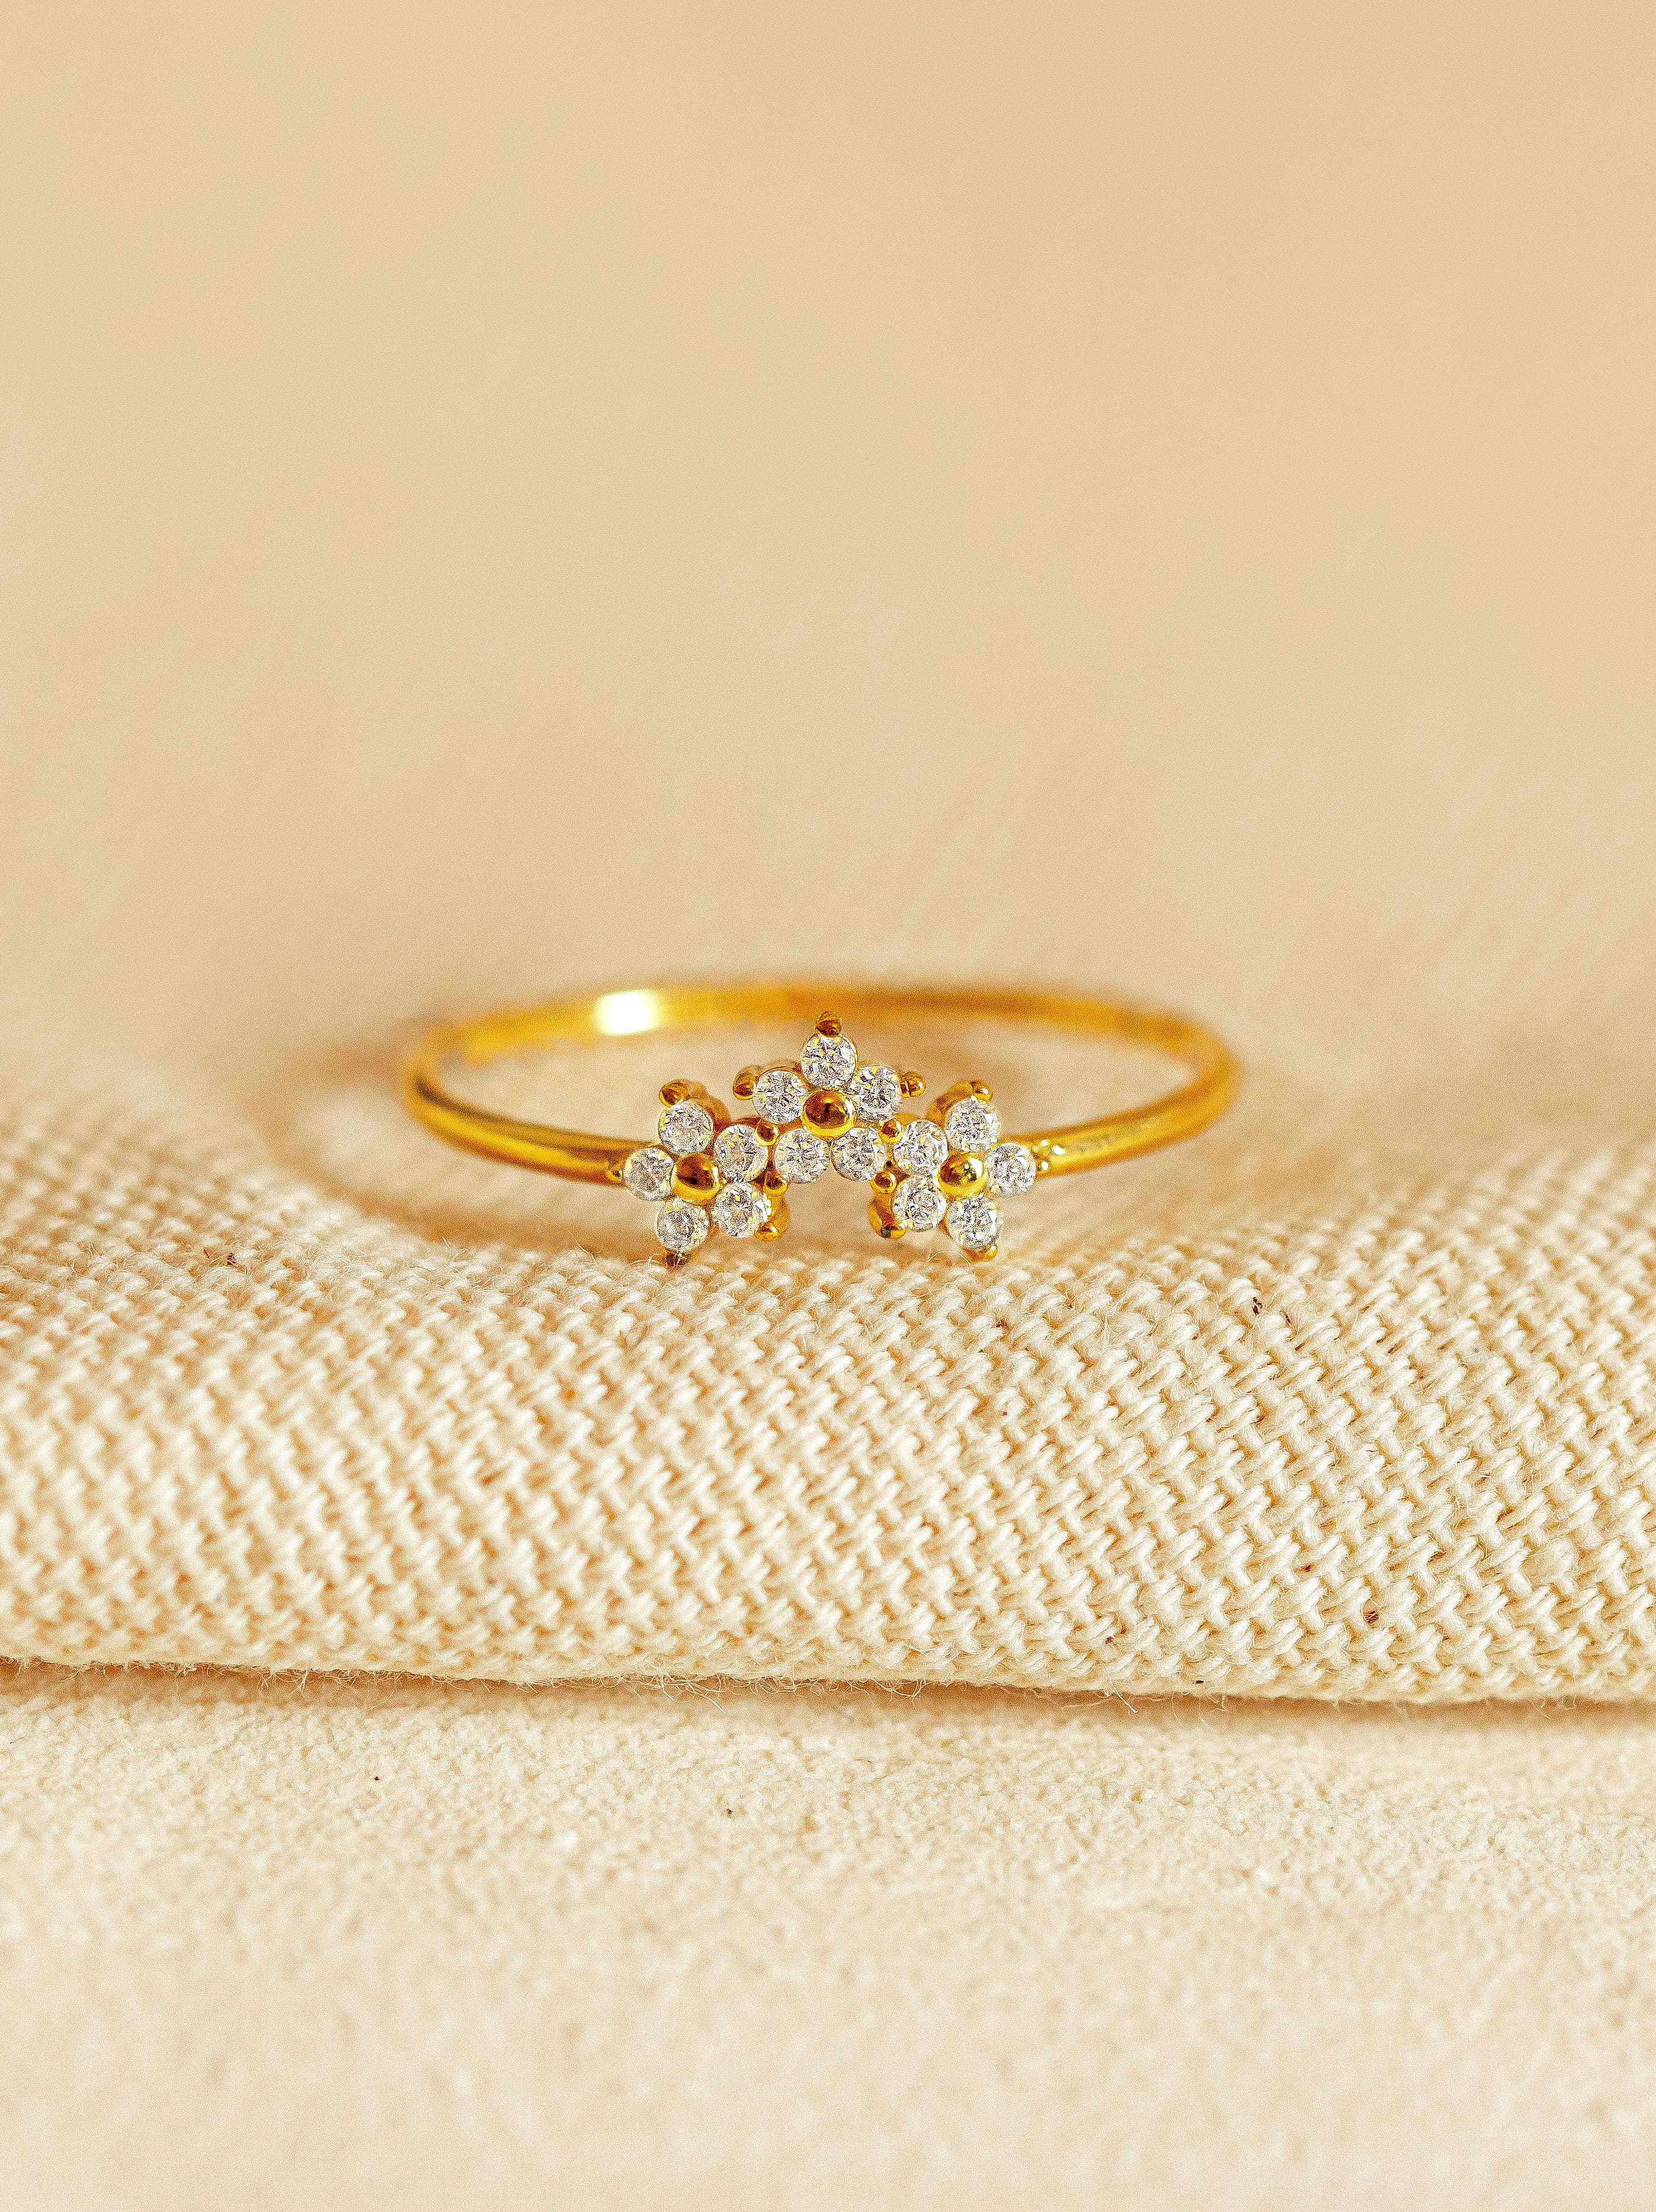 Gold Cluster Flower Ring - Three Dainty Flowers